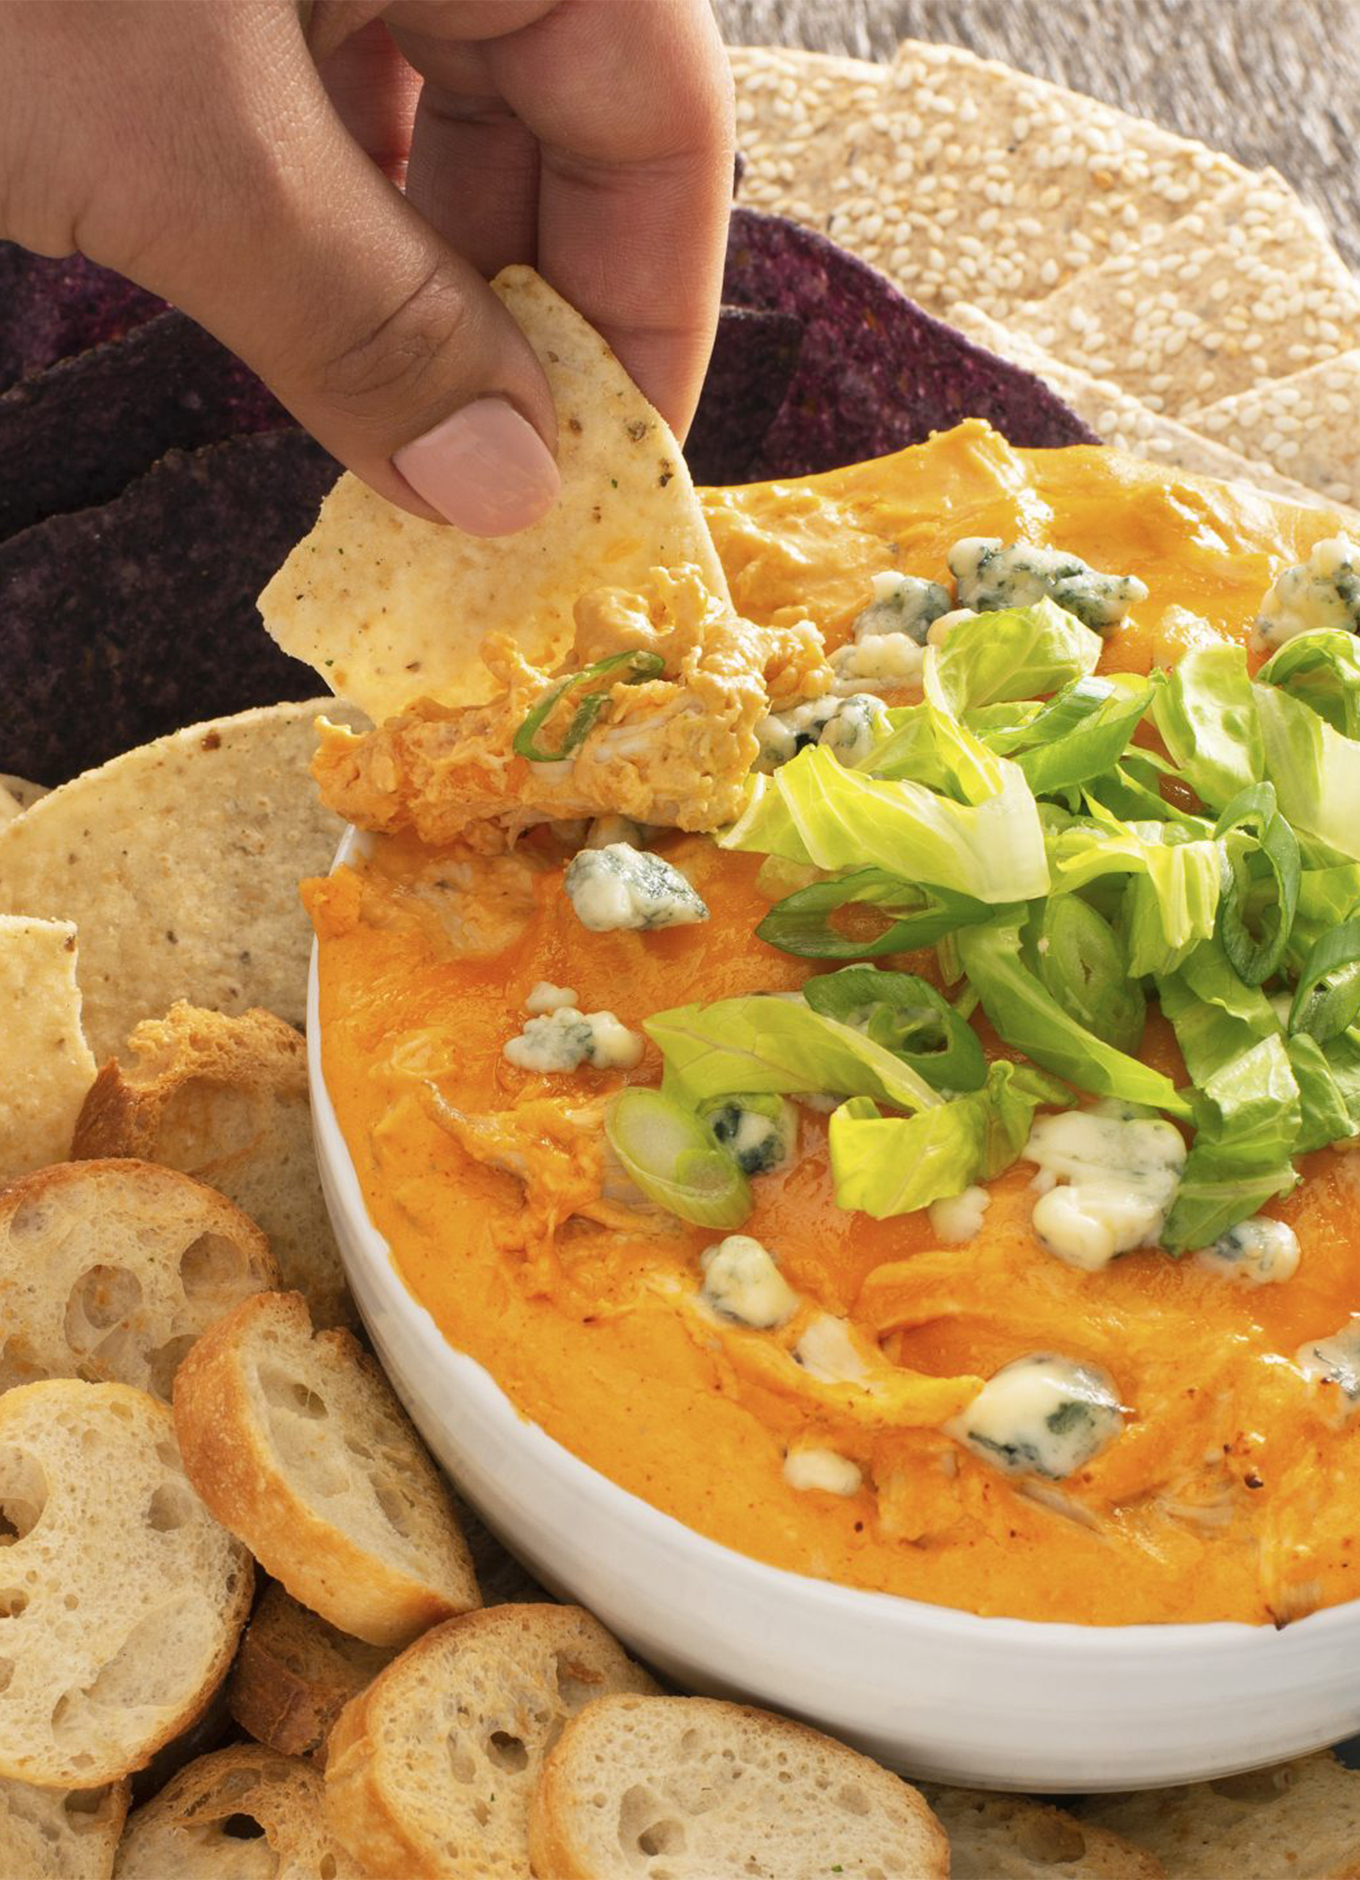 A bowl of Slow Cooker Buffalo Chicken Dip topped with green onions, surrounded by tortilla chips, pita chips, and crackers